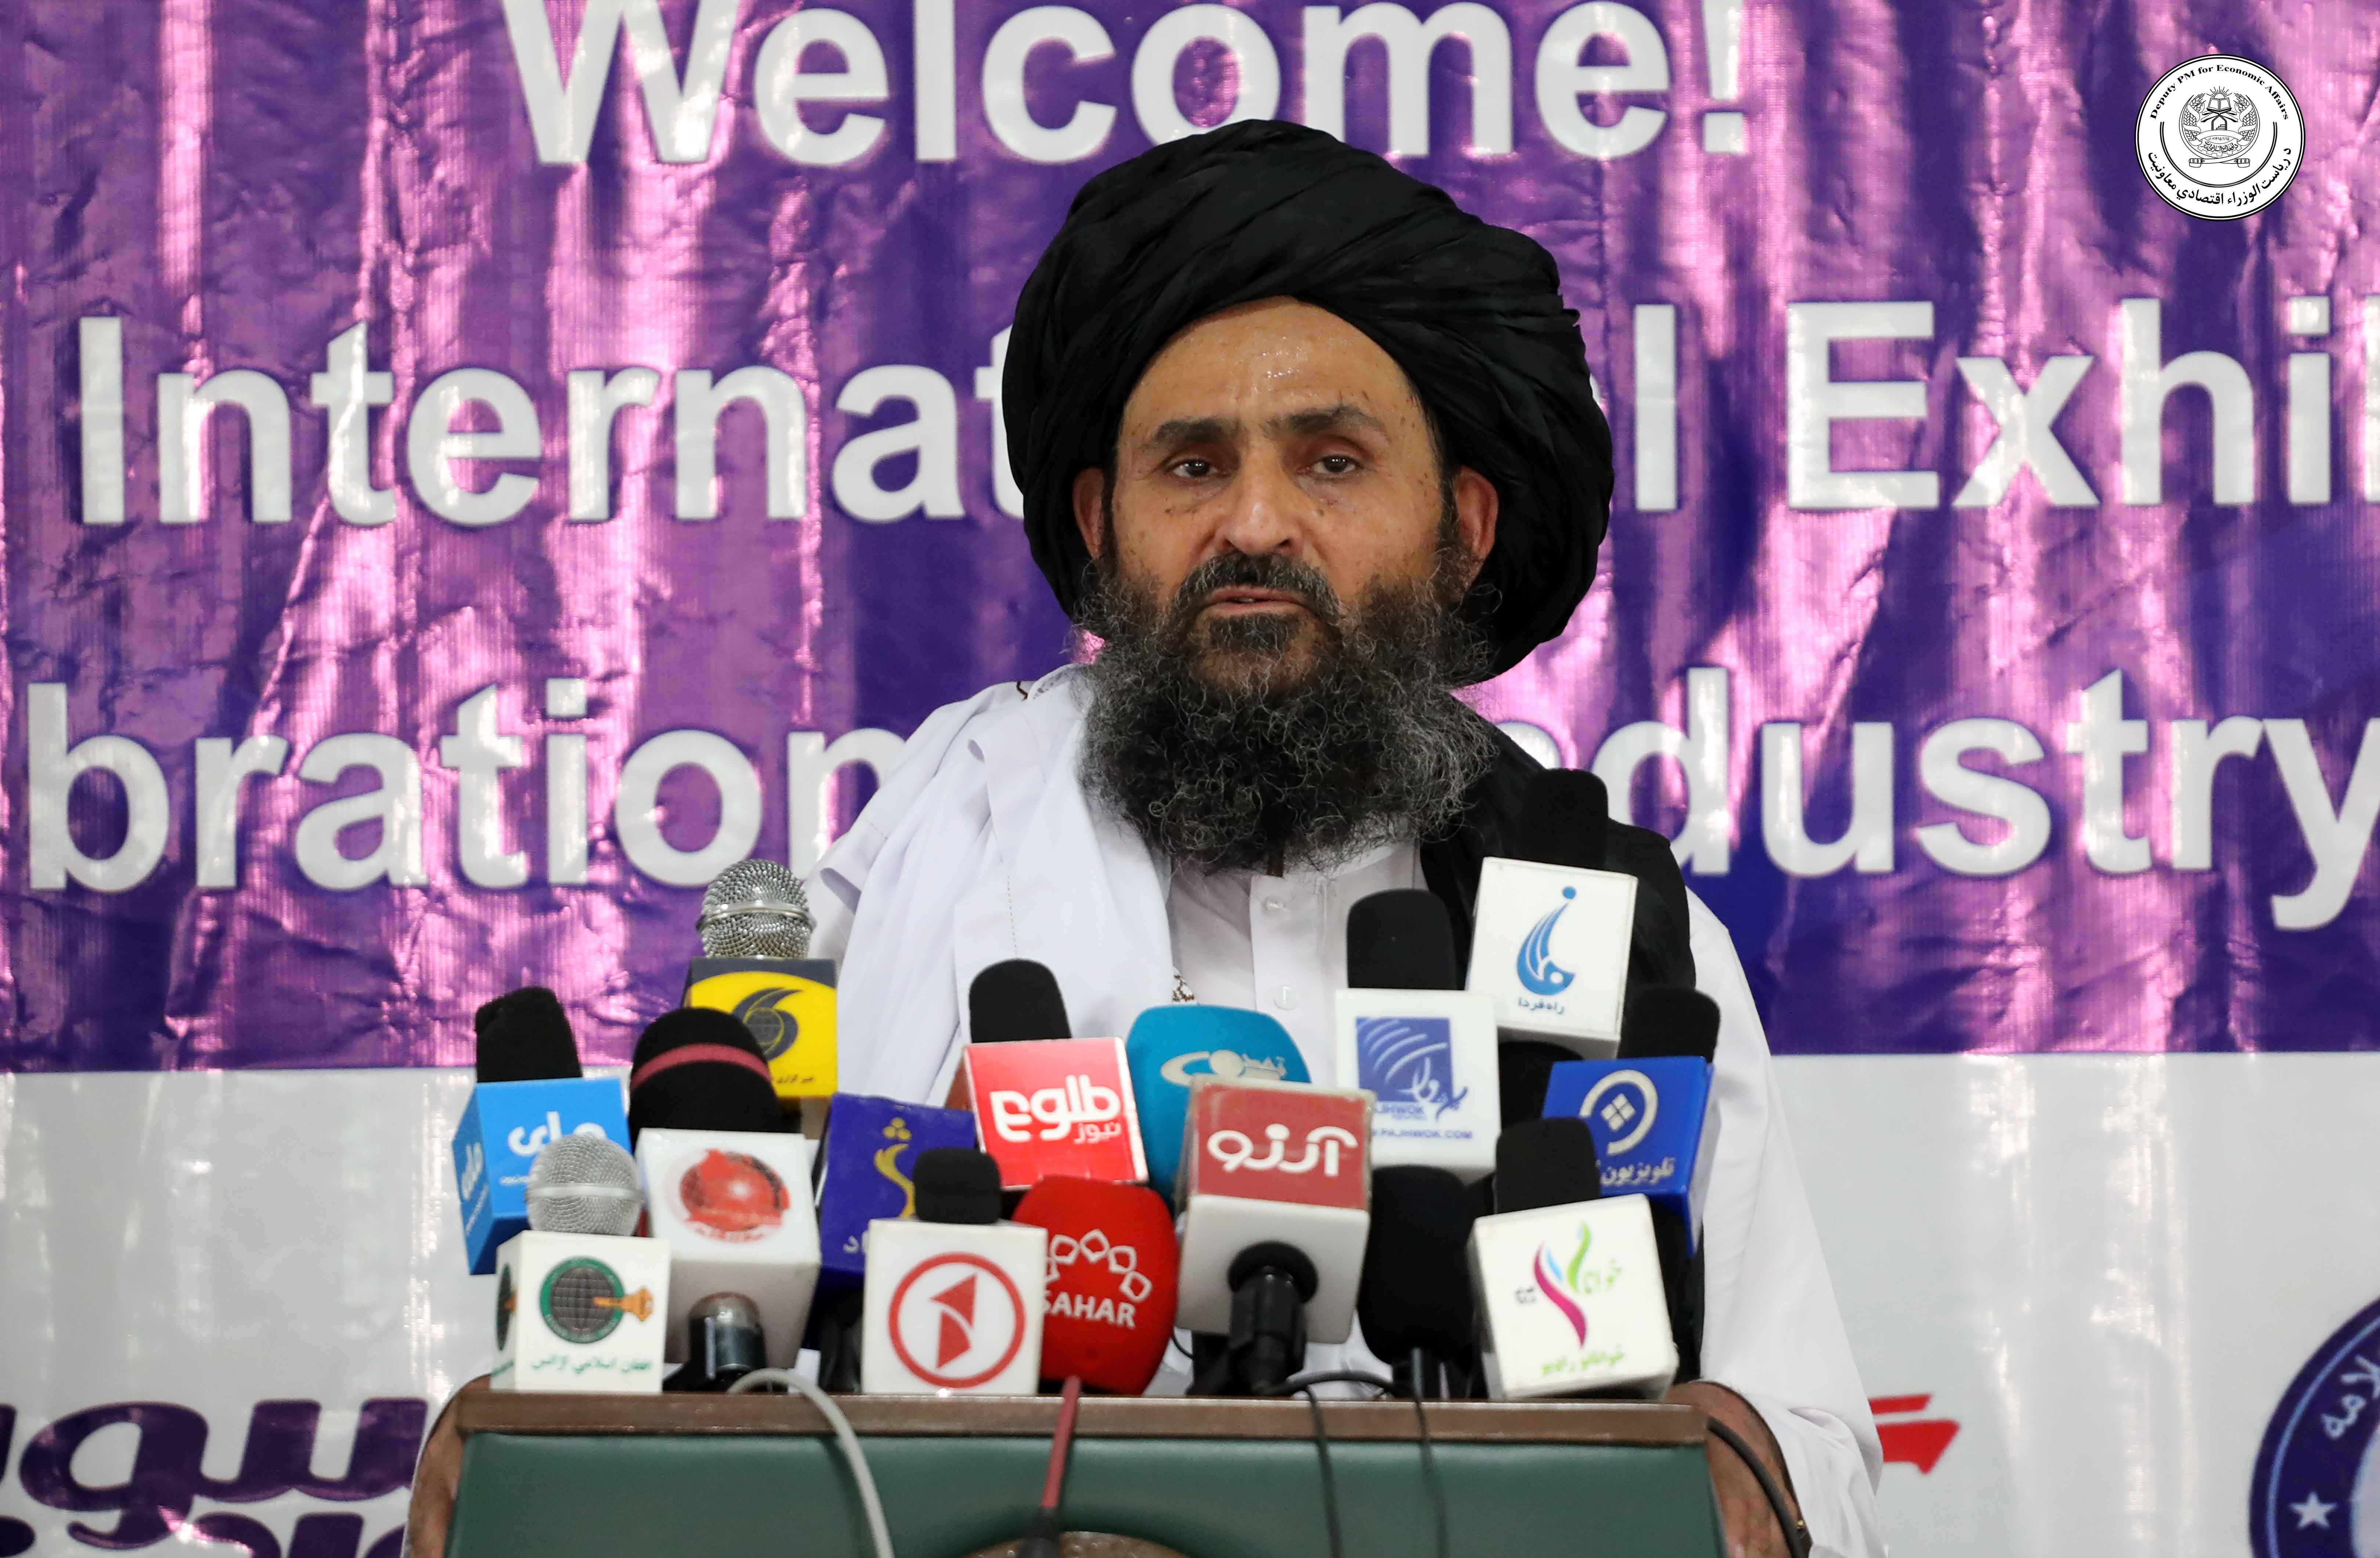 Mullah Abdul Ghani Beradar Akhund attends the opening of the Bahar-e-Naw International Public Exhibition